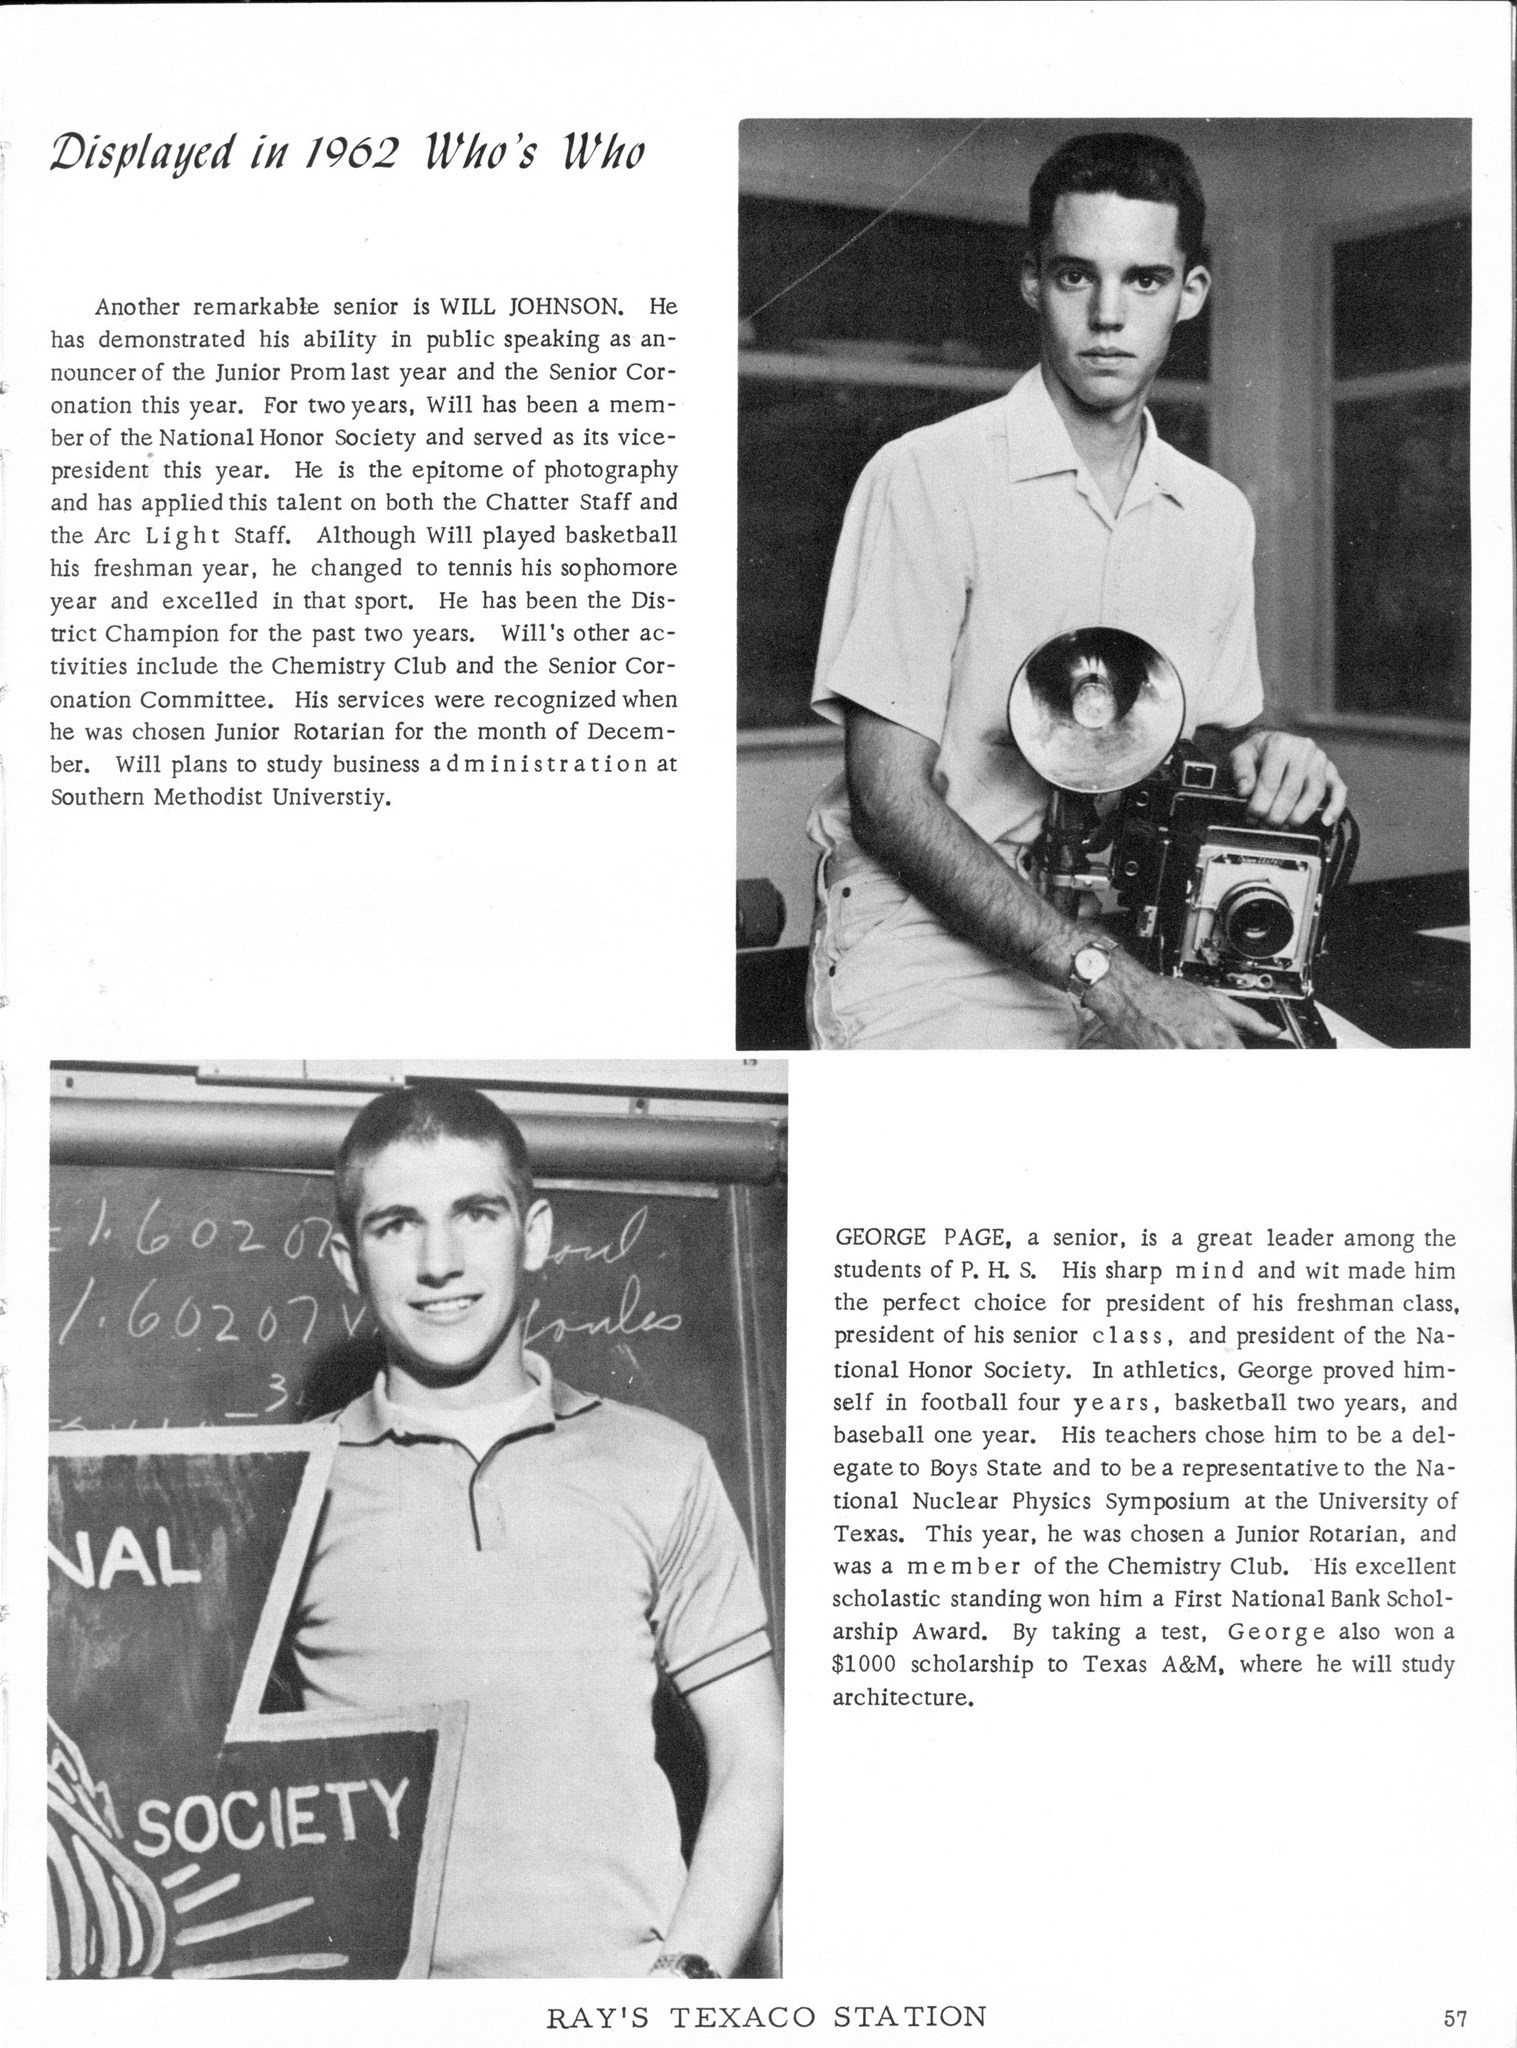 ../../../Images/Large/1962/Arclight-1962-pg0057.jpg